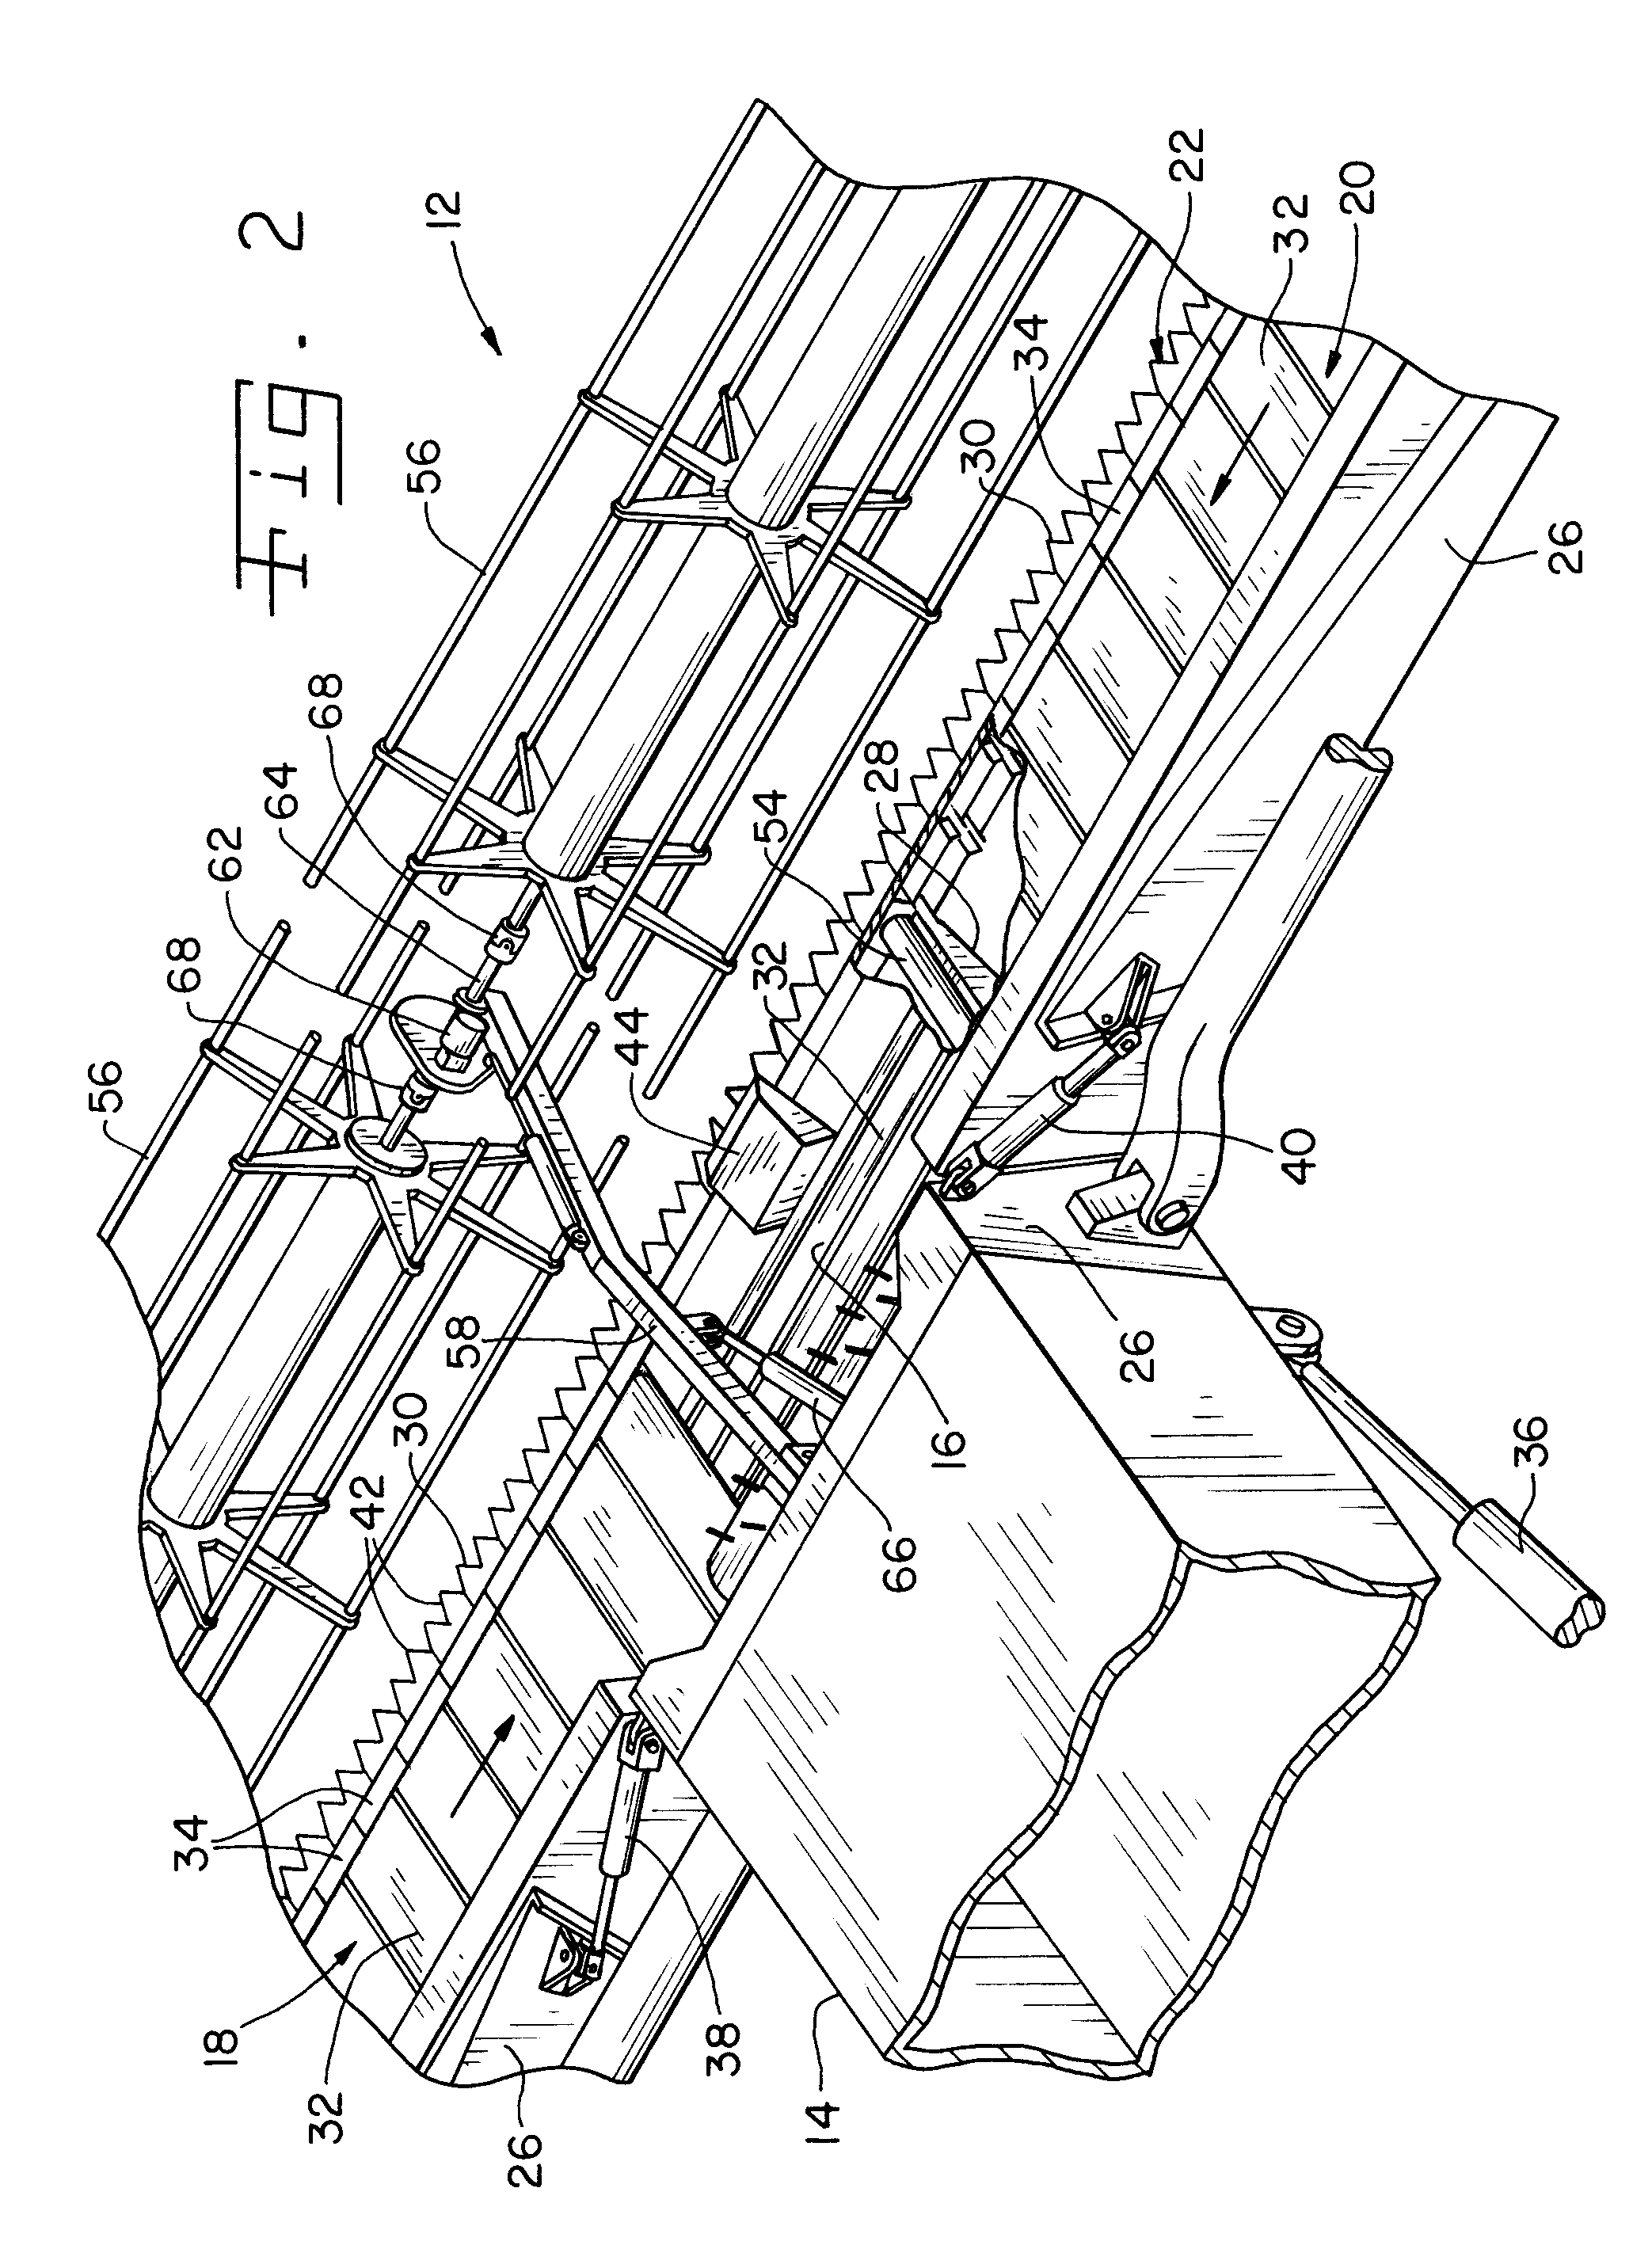 Sectionalized belt guide for draper belt in an agricultural harvesting machine